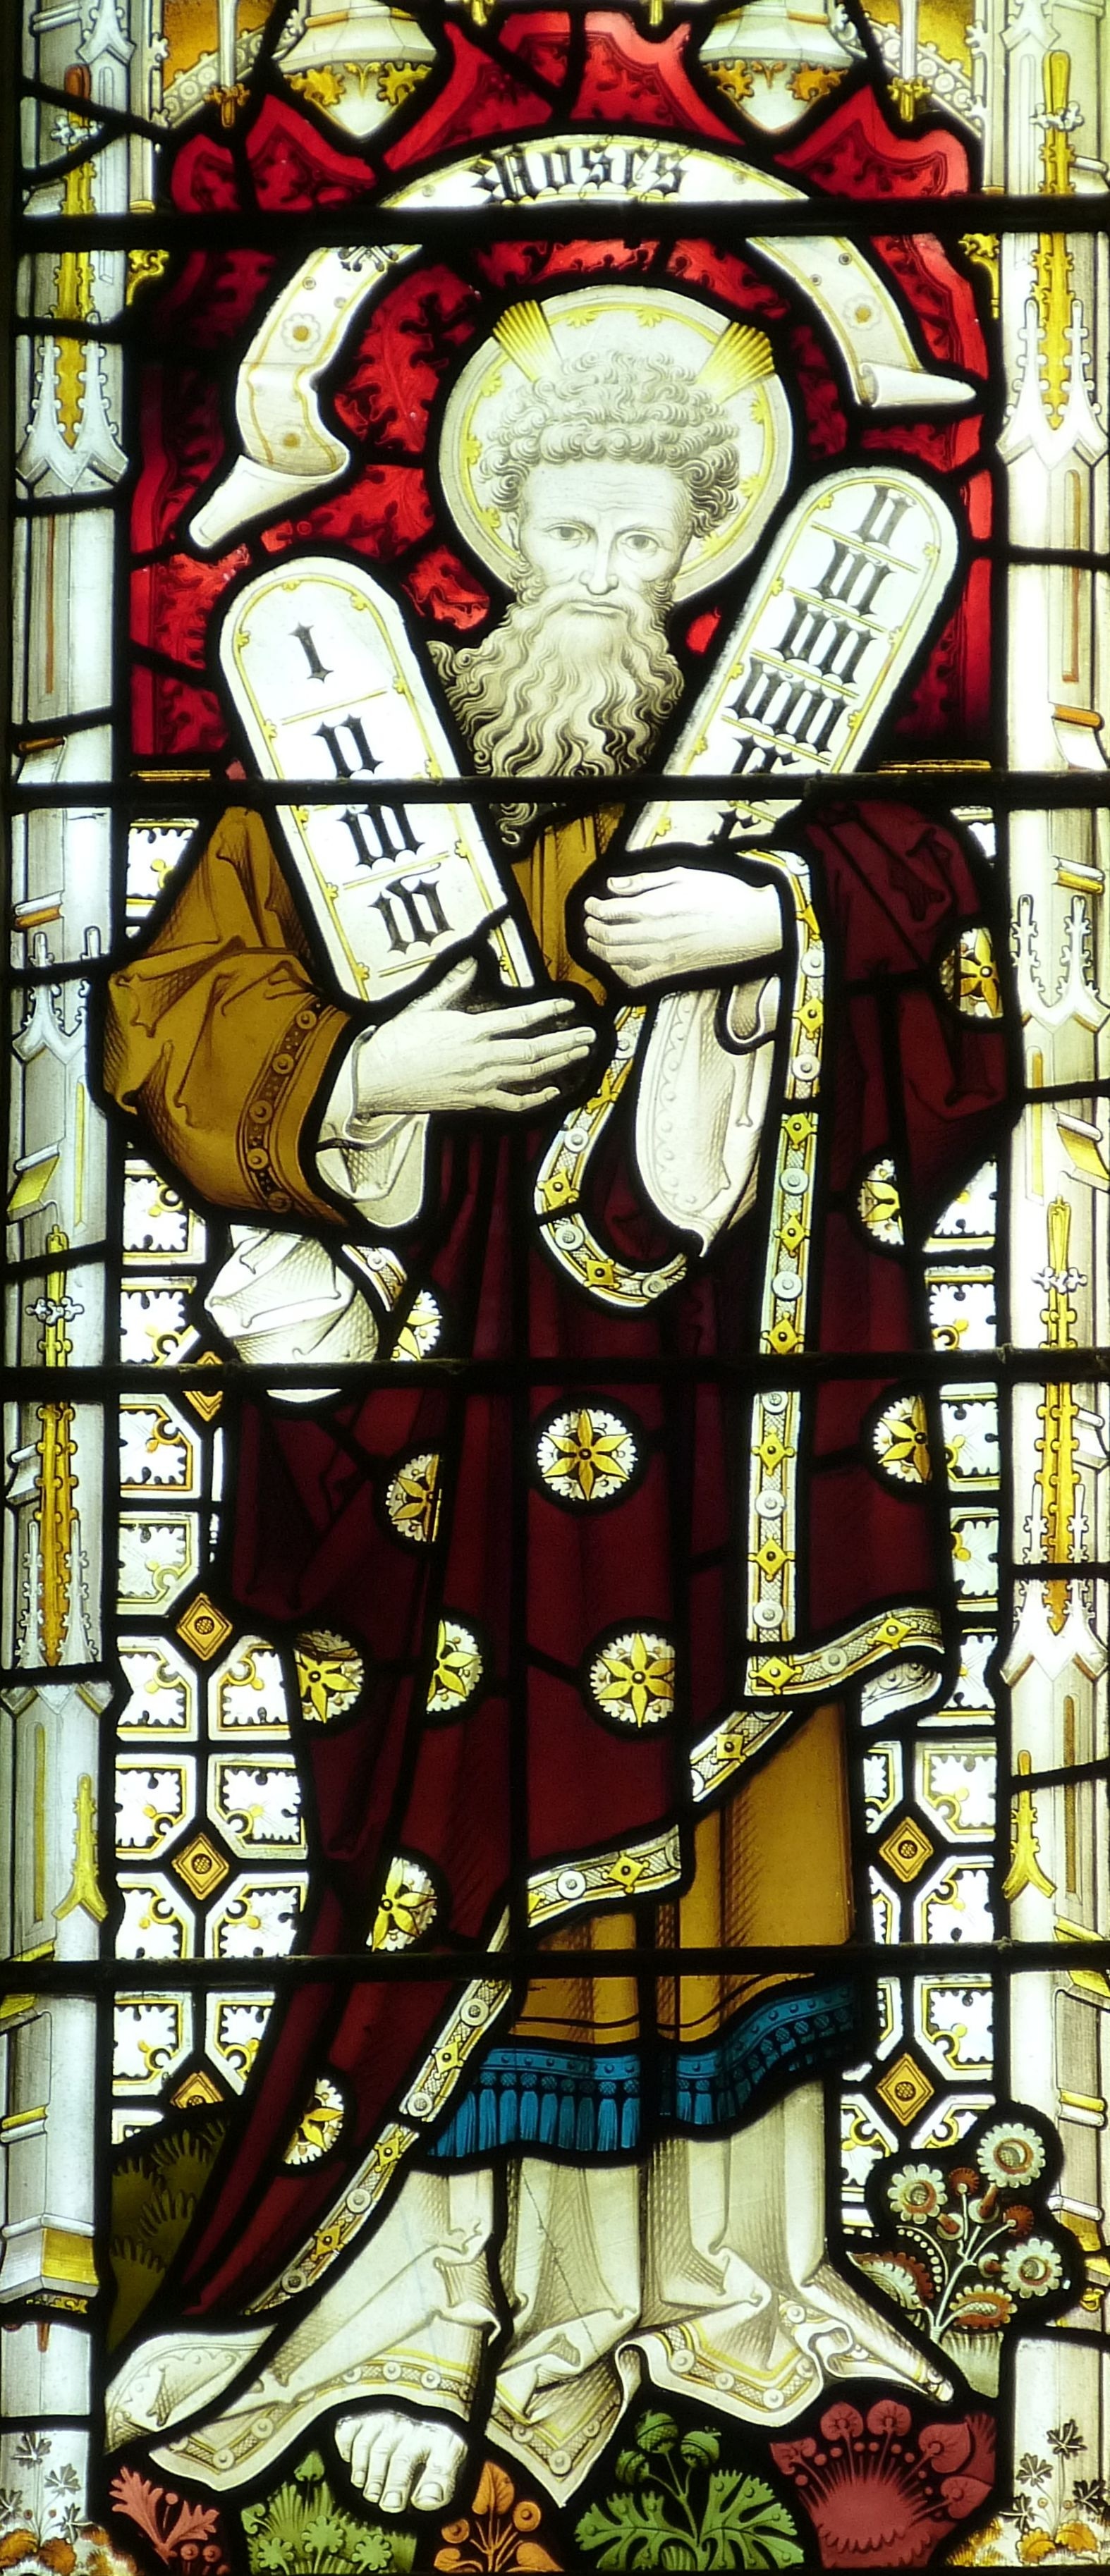 man holding blocks maroon red and white tainted glass